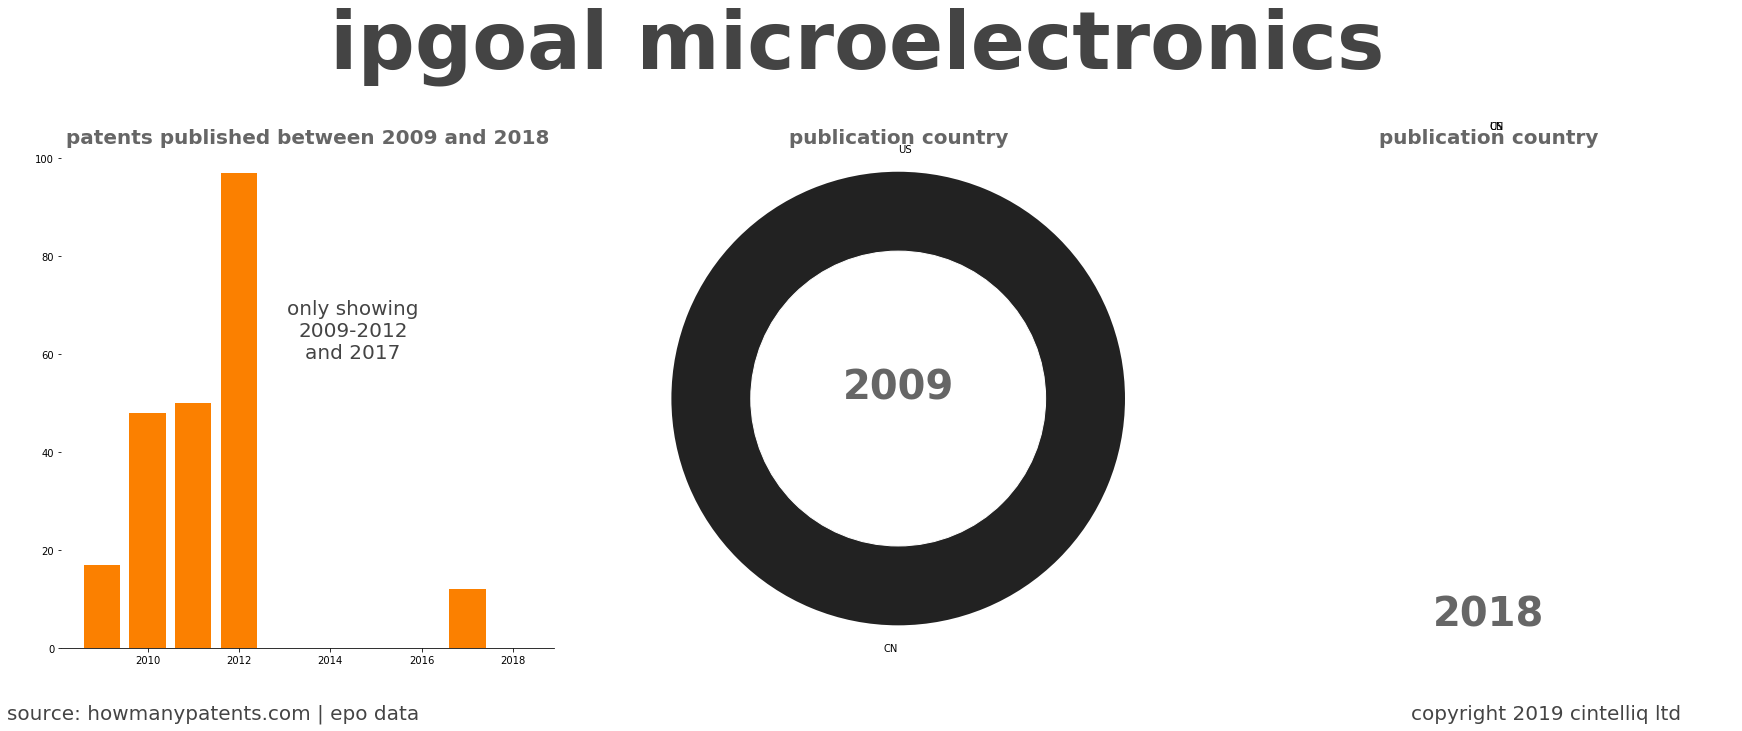 summary of patents for Ipgoal Microelectronics 